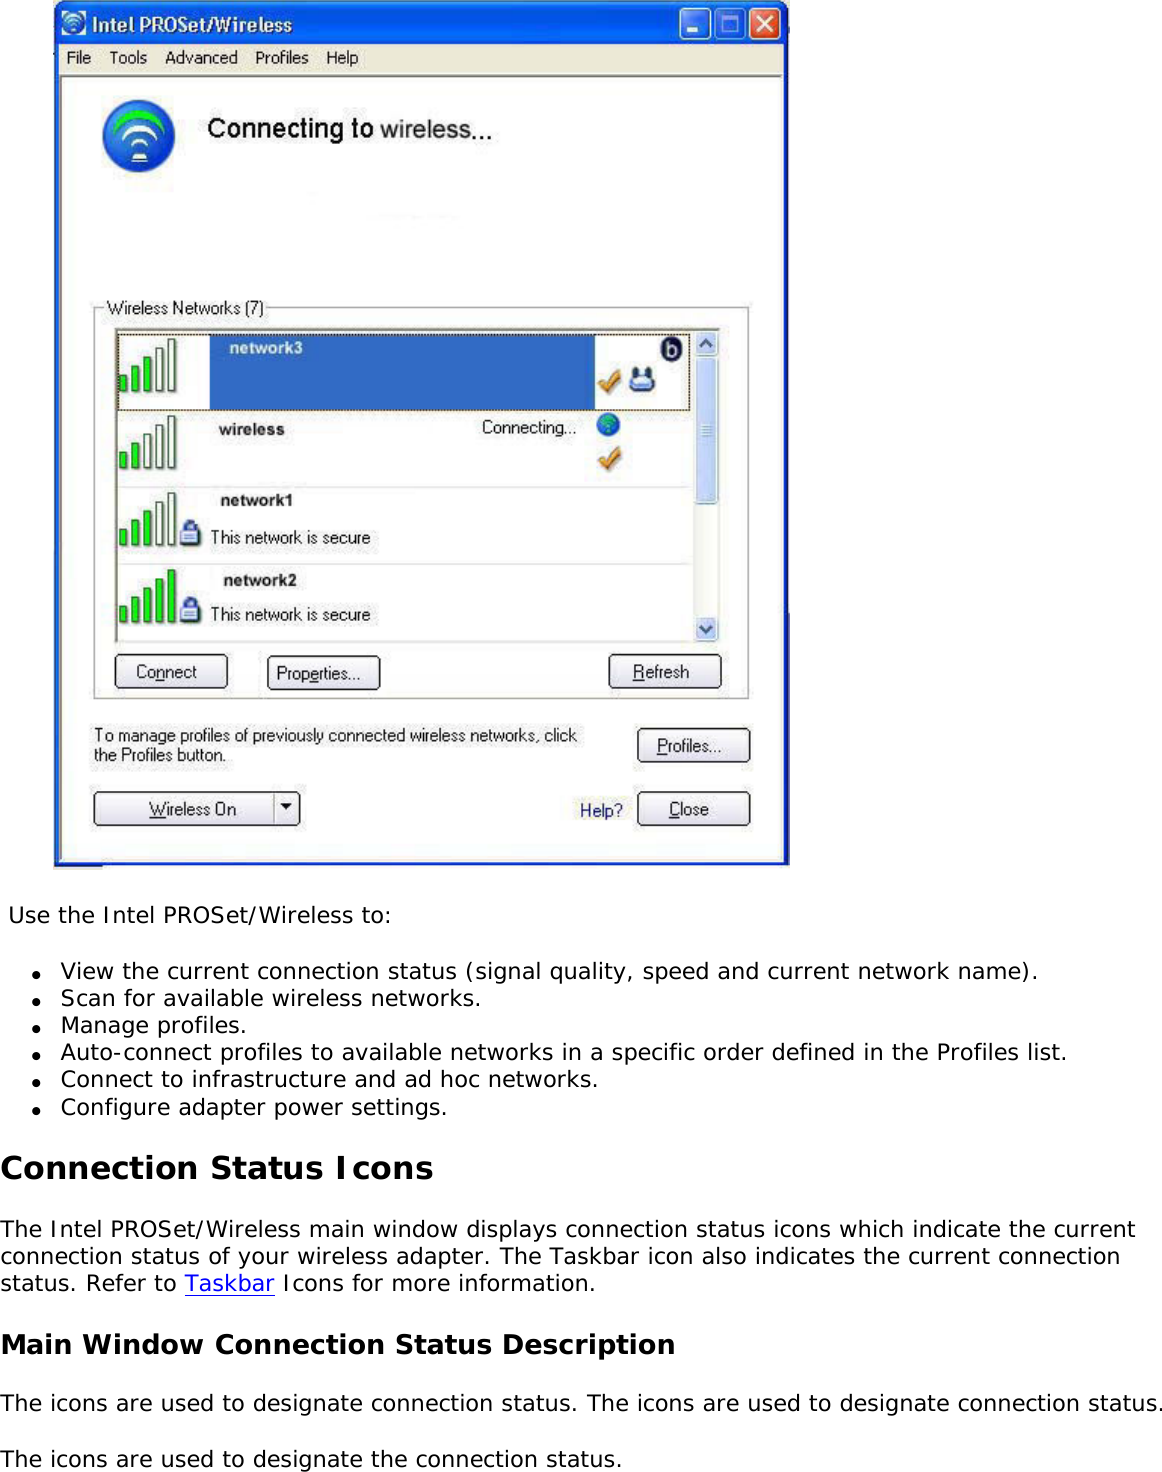   Use the Intel PROSet/Wireless to: ●     View the current connection status (signal quality, speed and current network name).●     Scan for available wireless networks.●     Manage profiles.●     Auto-connect profiles to available networks in a specific order defined in the Profiles list.●     Connect to infrastructure and ad hoc networks.●     Configure adapter power settings.Connection Status IconsThe Intel PROSet/Wireless main window displays connection status icons which indicate the current connection status of your wireless adapter. The Taskbar icon also indicates the current connection status. Refer to Taskbar Icons for more information. Main Window Connection Status Description The icons are used to designate connection status. The icons are used to designate connection status. The icons are used to designate the connection status. 